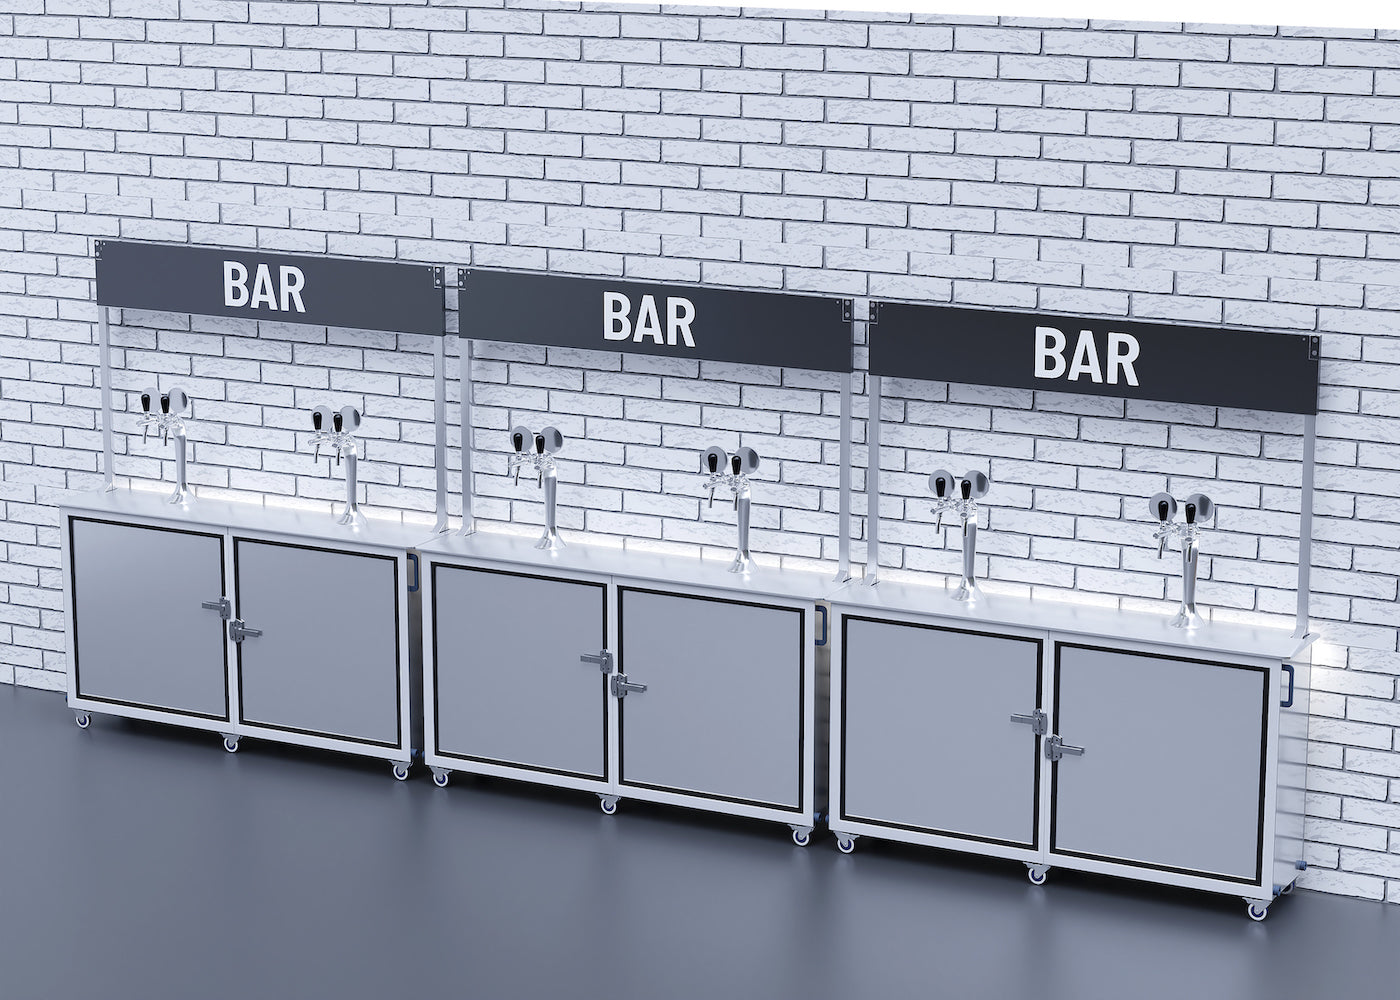 3 slimline beer stations against a wall